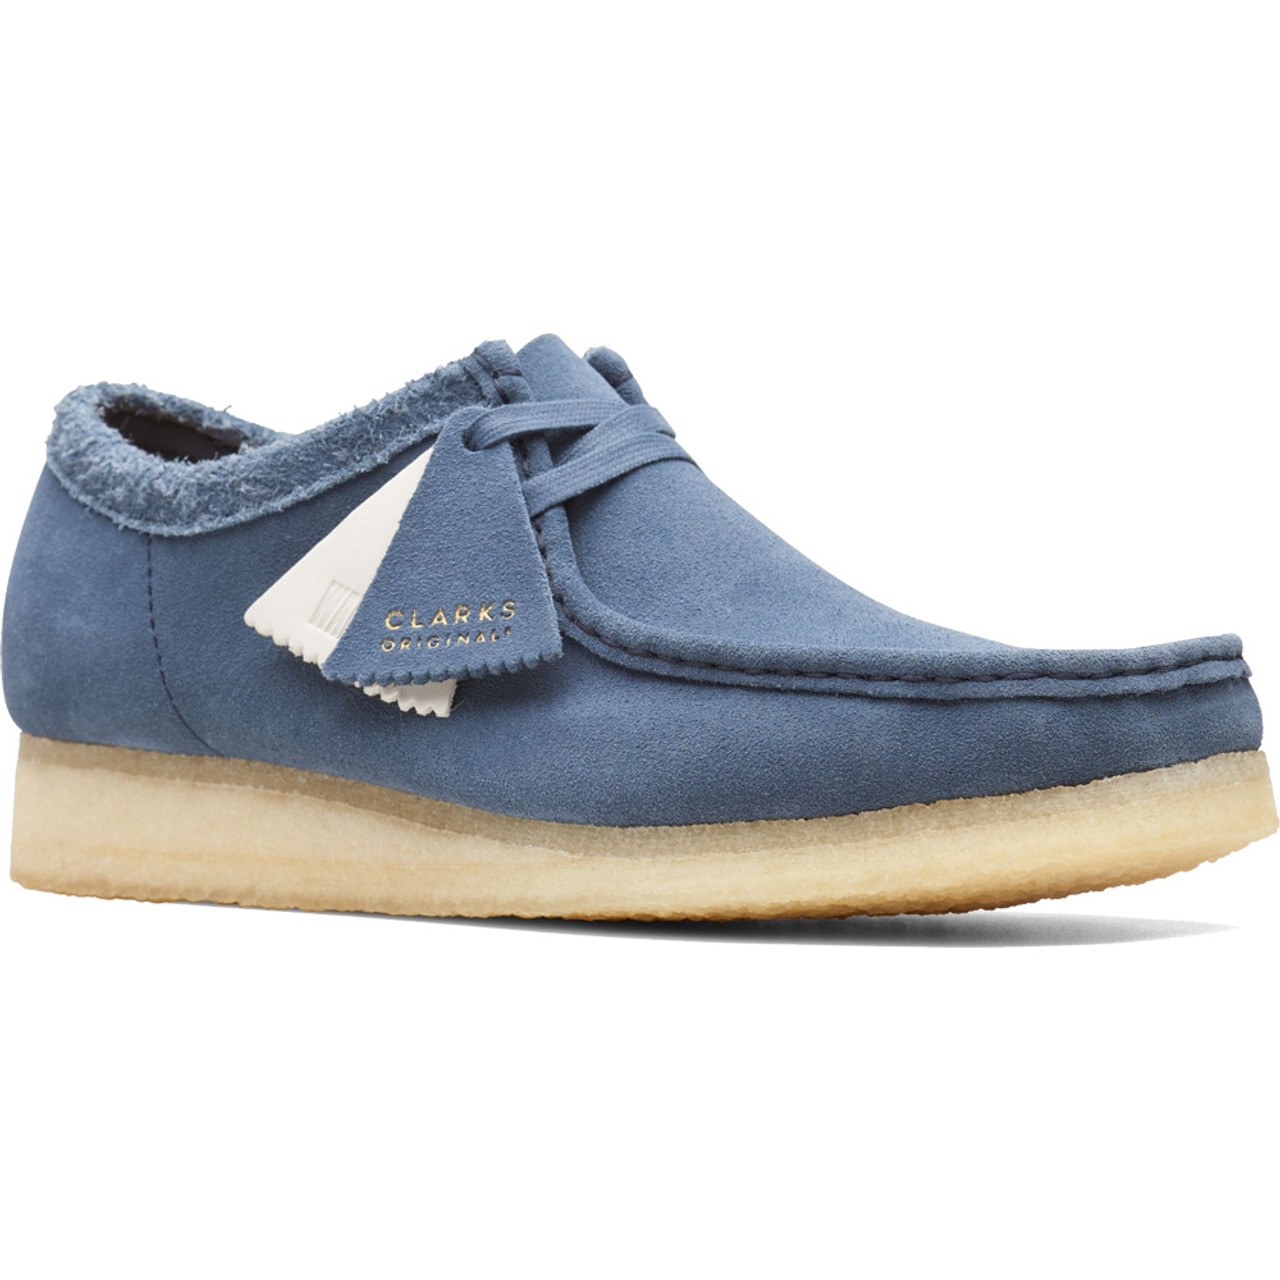 Clarks Men's Classic Wallabee Suede Lace Up Boot